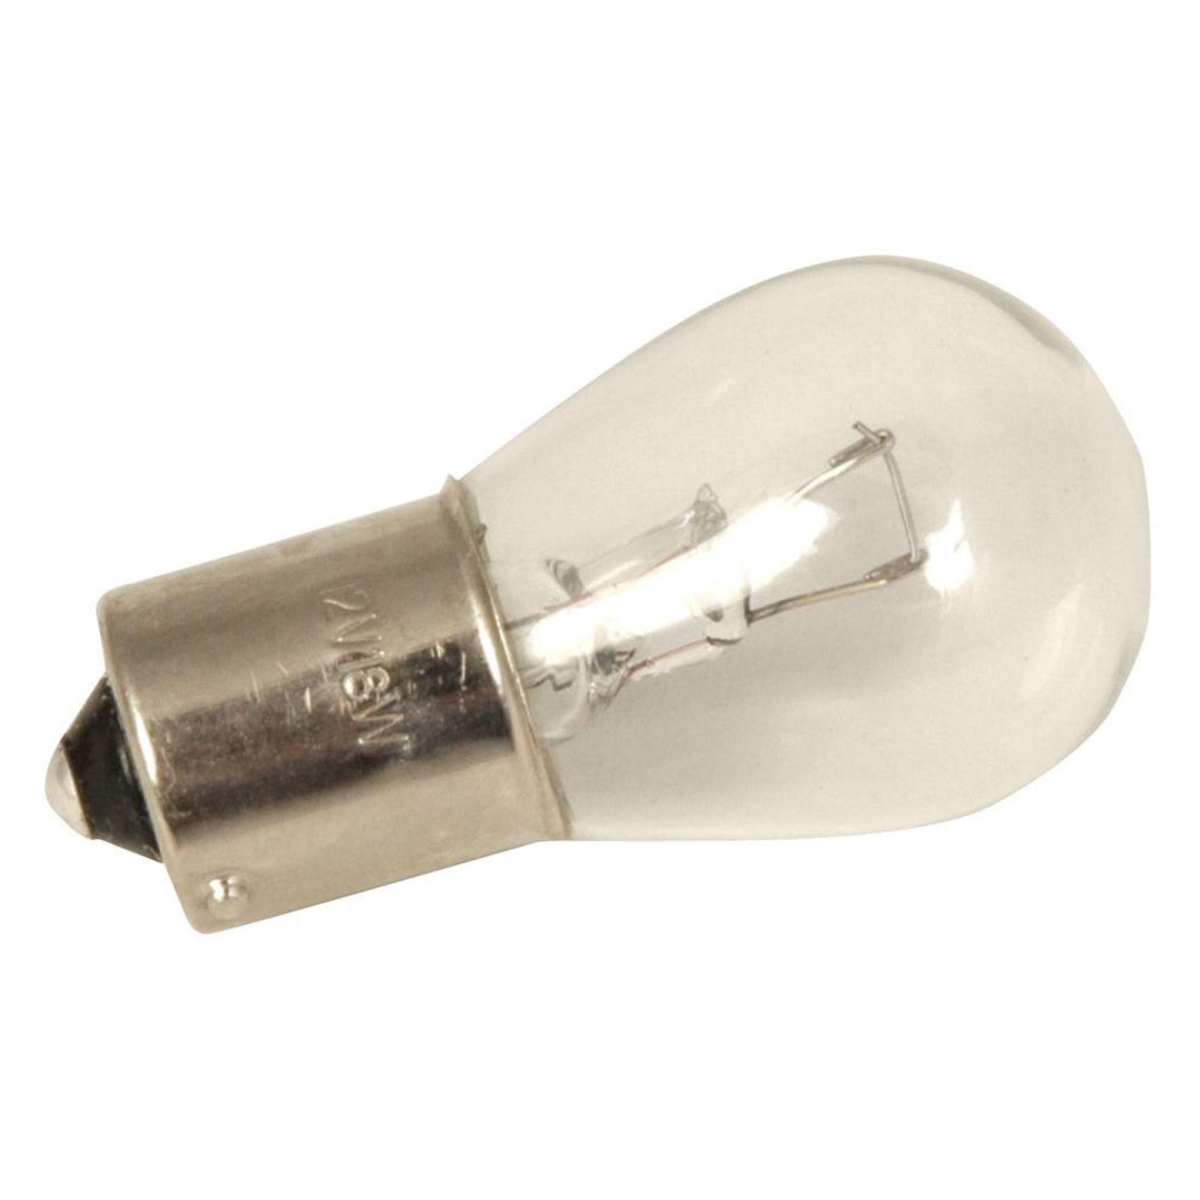 Coleman Cable - Southwire 95506 18 Watt Bayonet Base Replacement Light Bulb